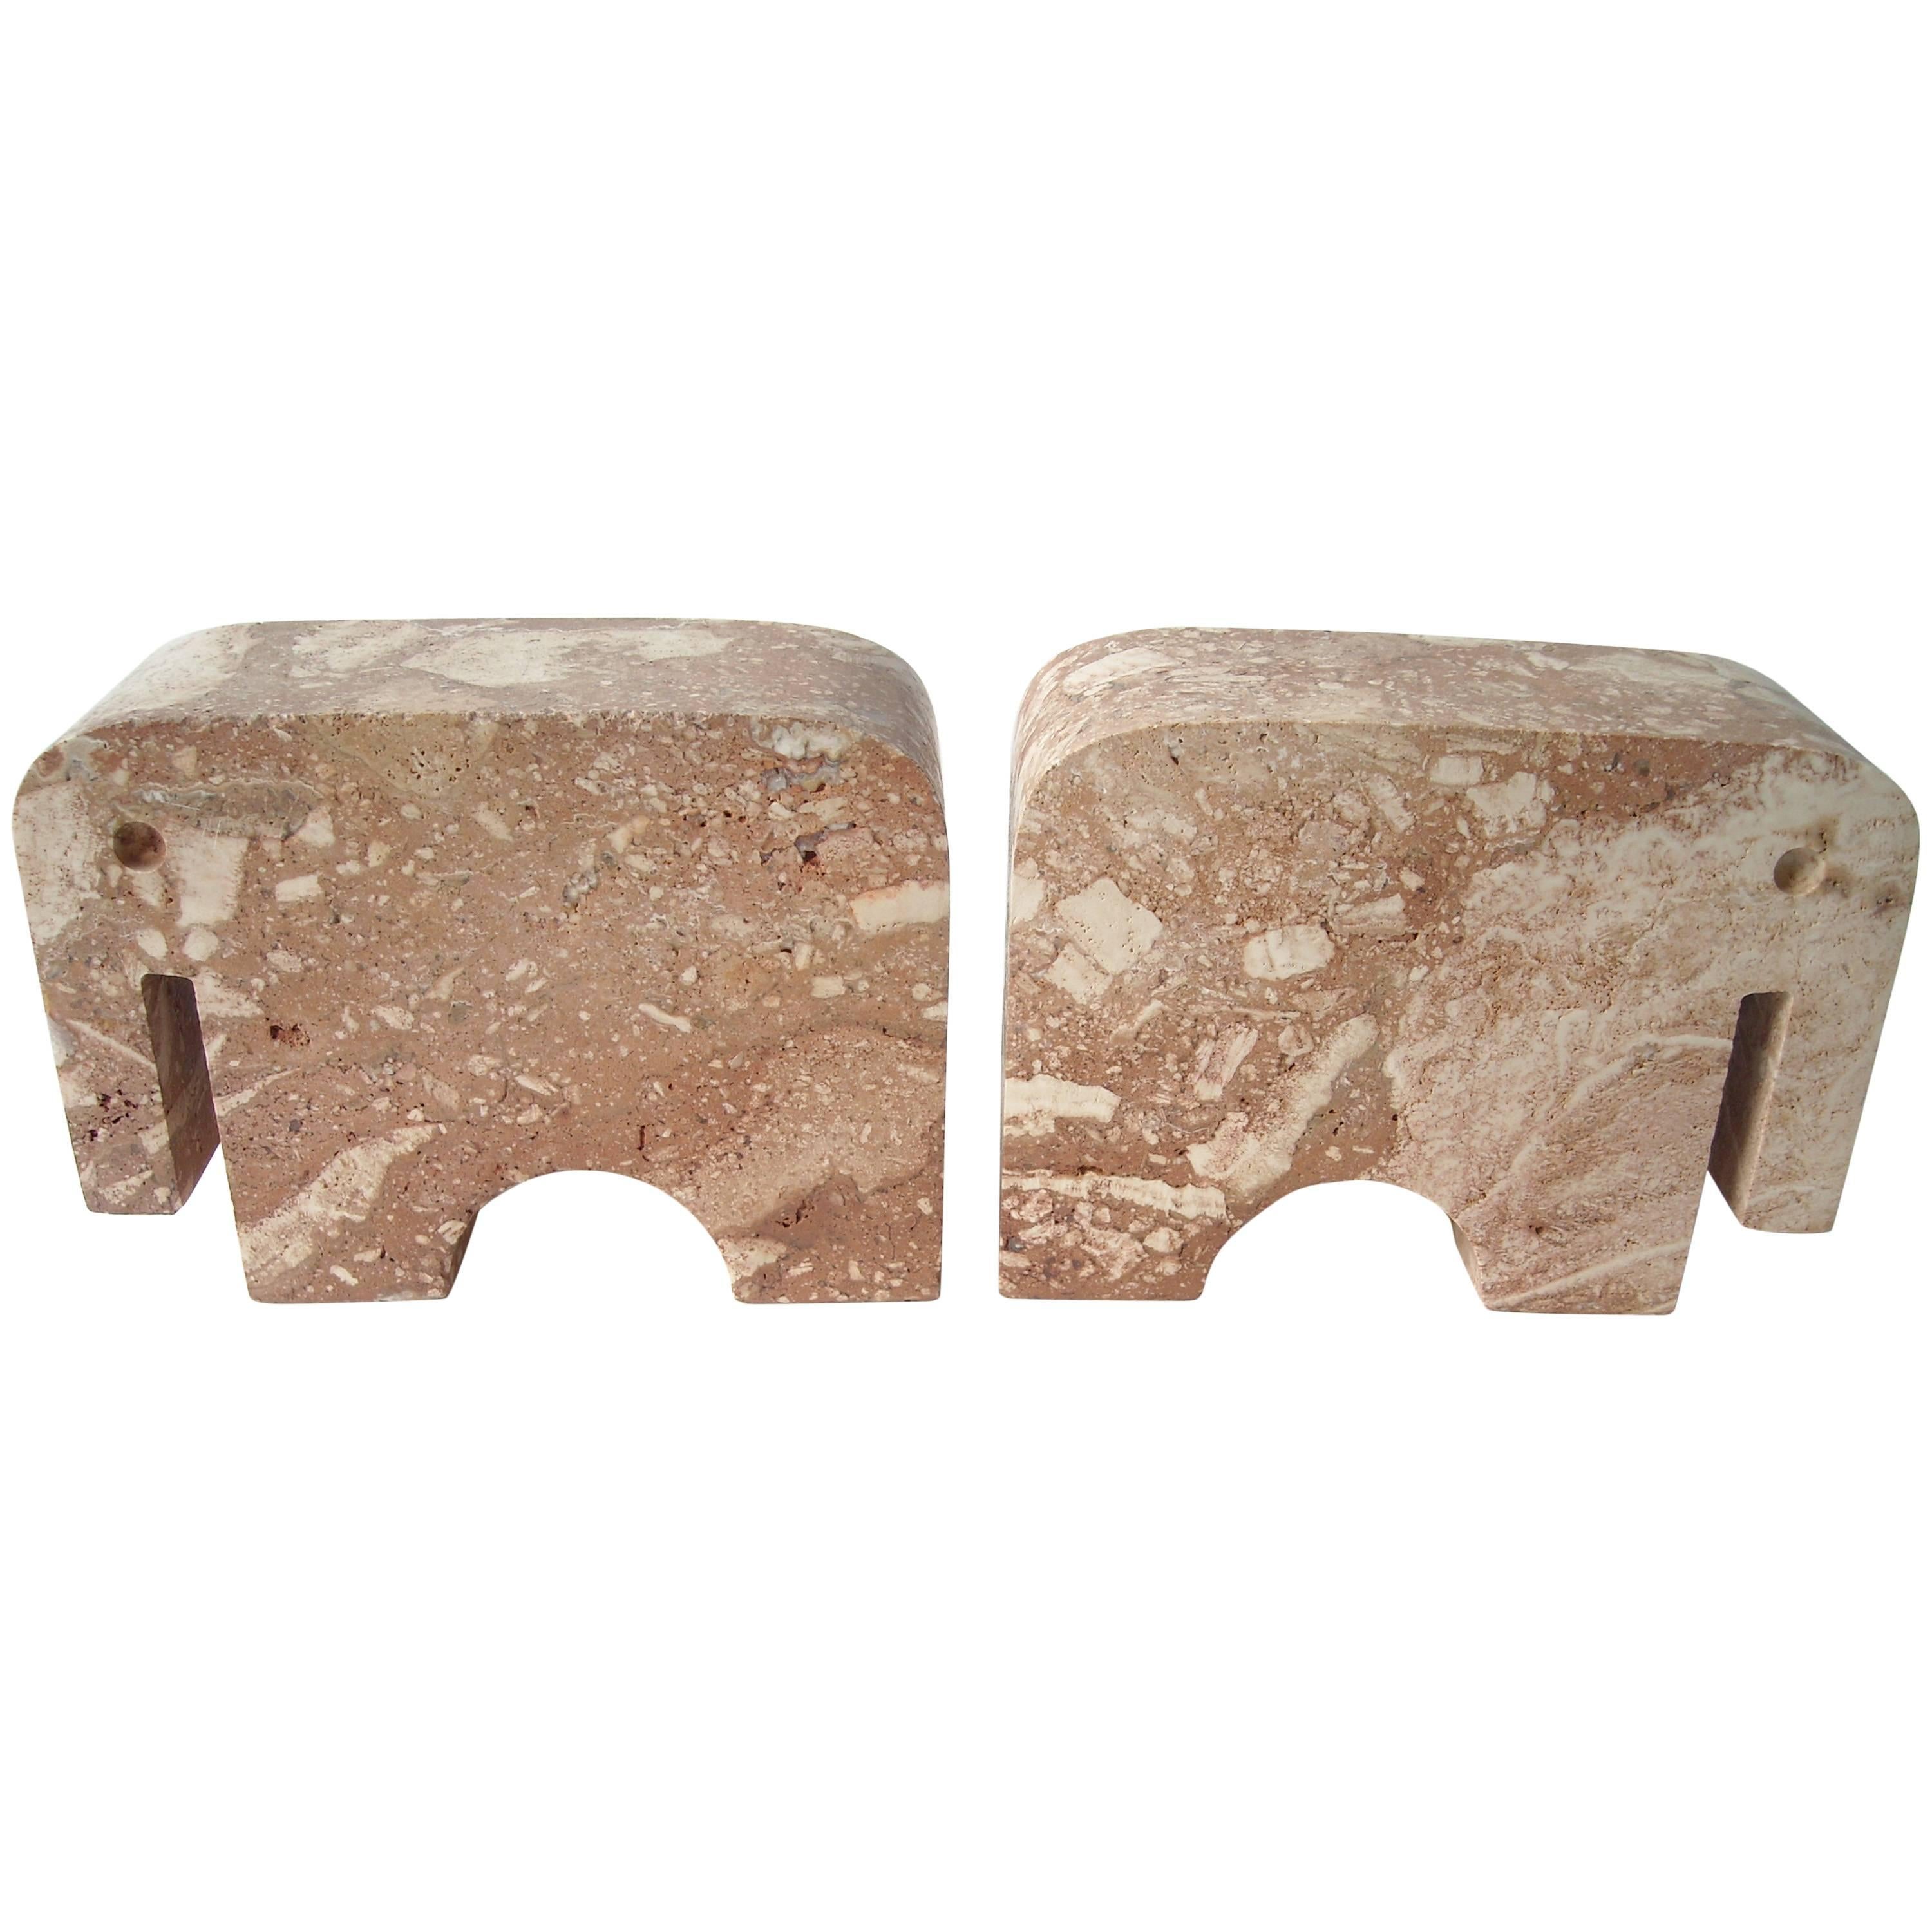 Travertine Elephant Bookends by Flli Mannelli for Raymor, Label